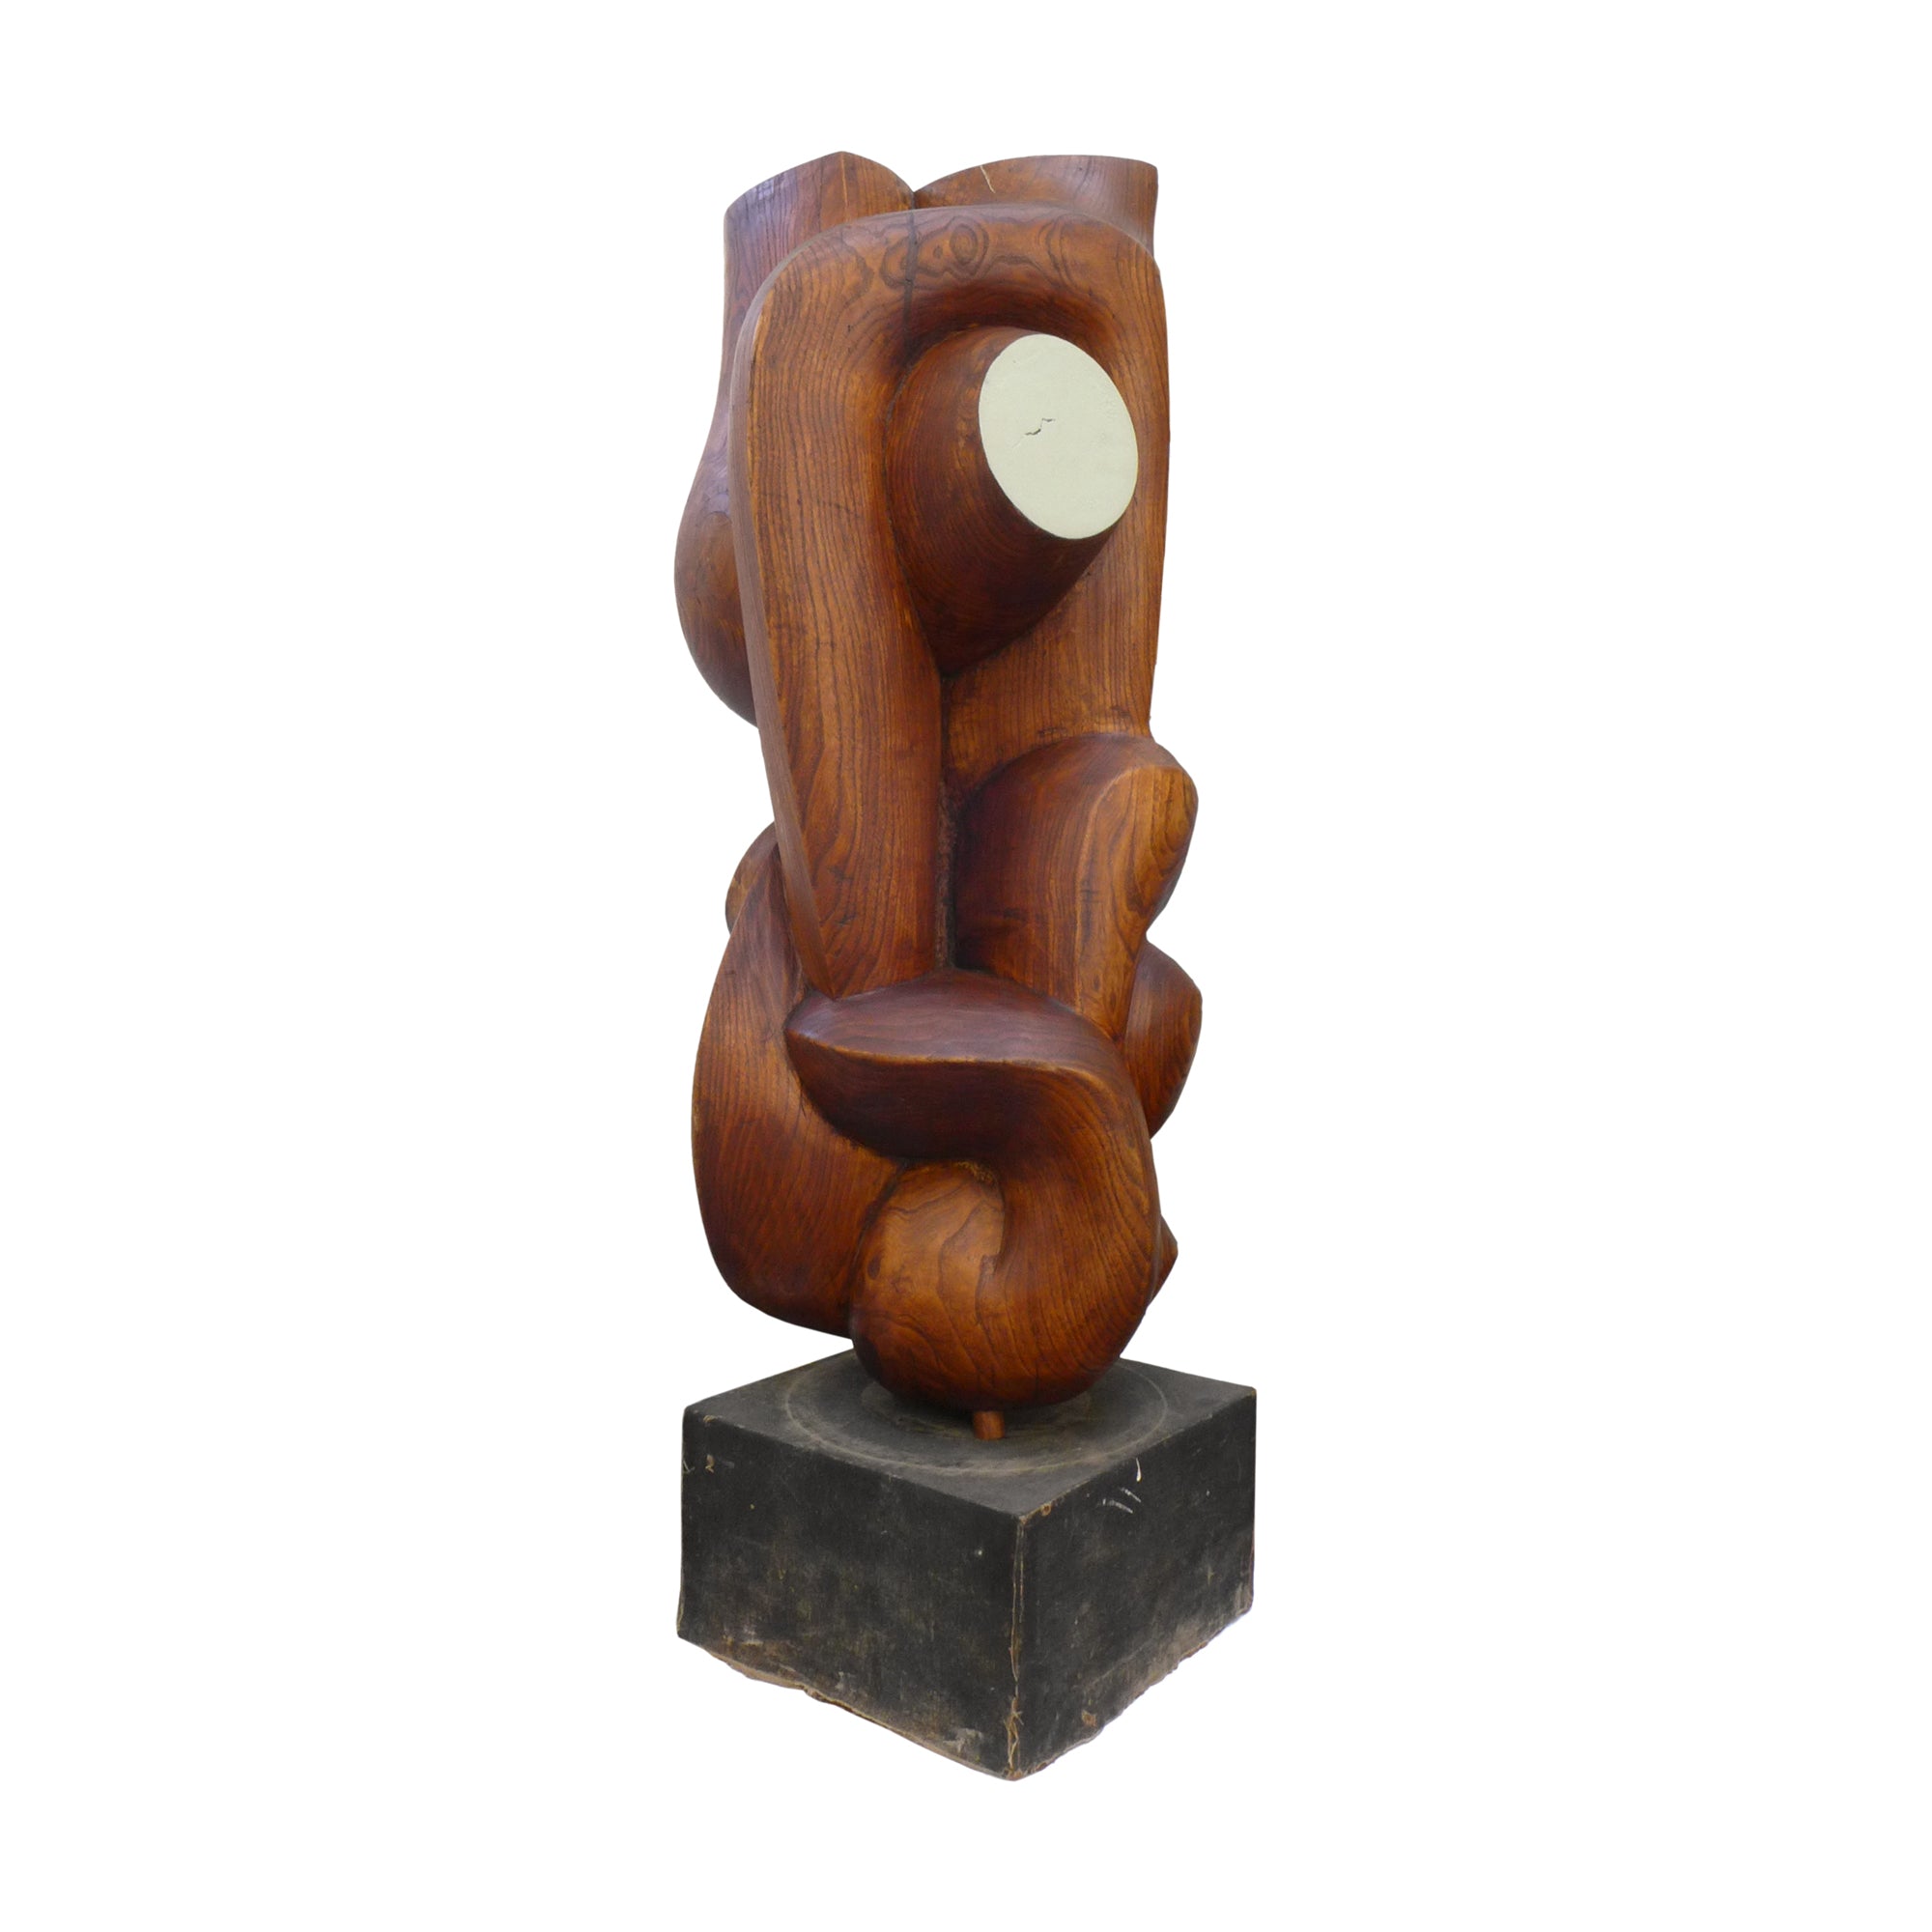 Massive Carved & Painted Wood Biomorphic Sculpture